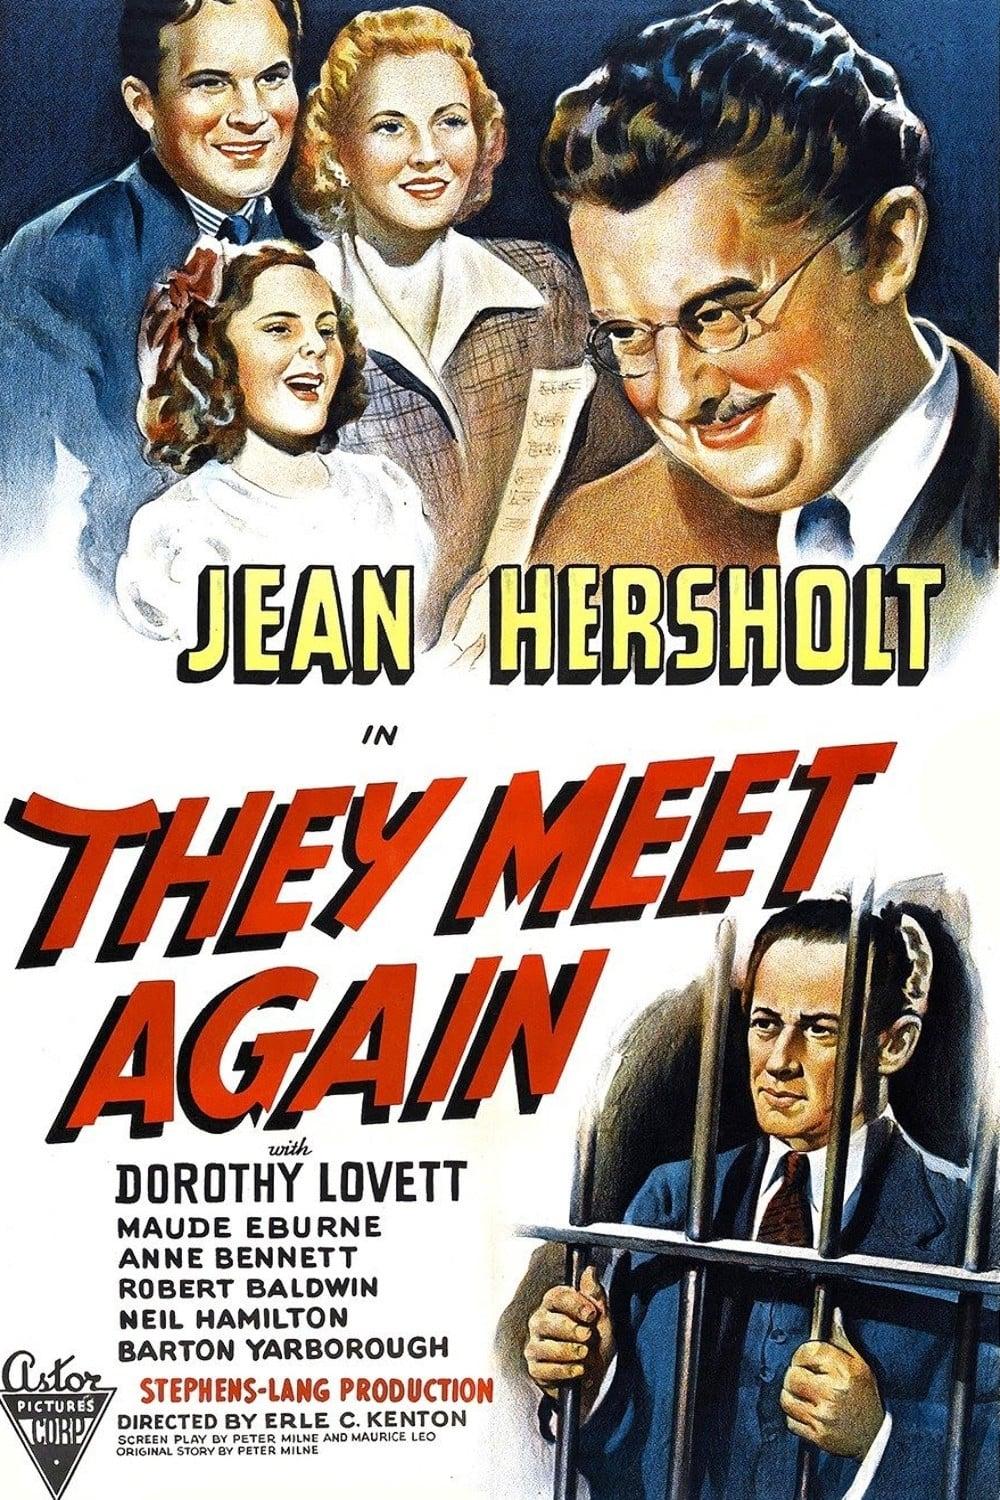 They Meet Again poster